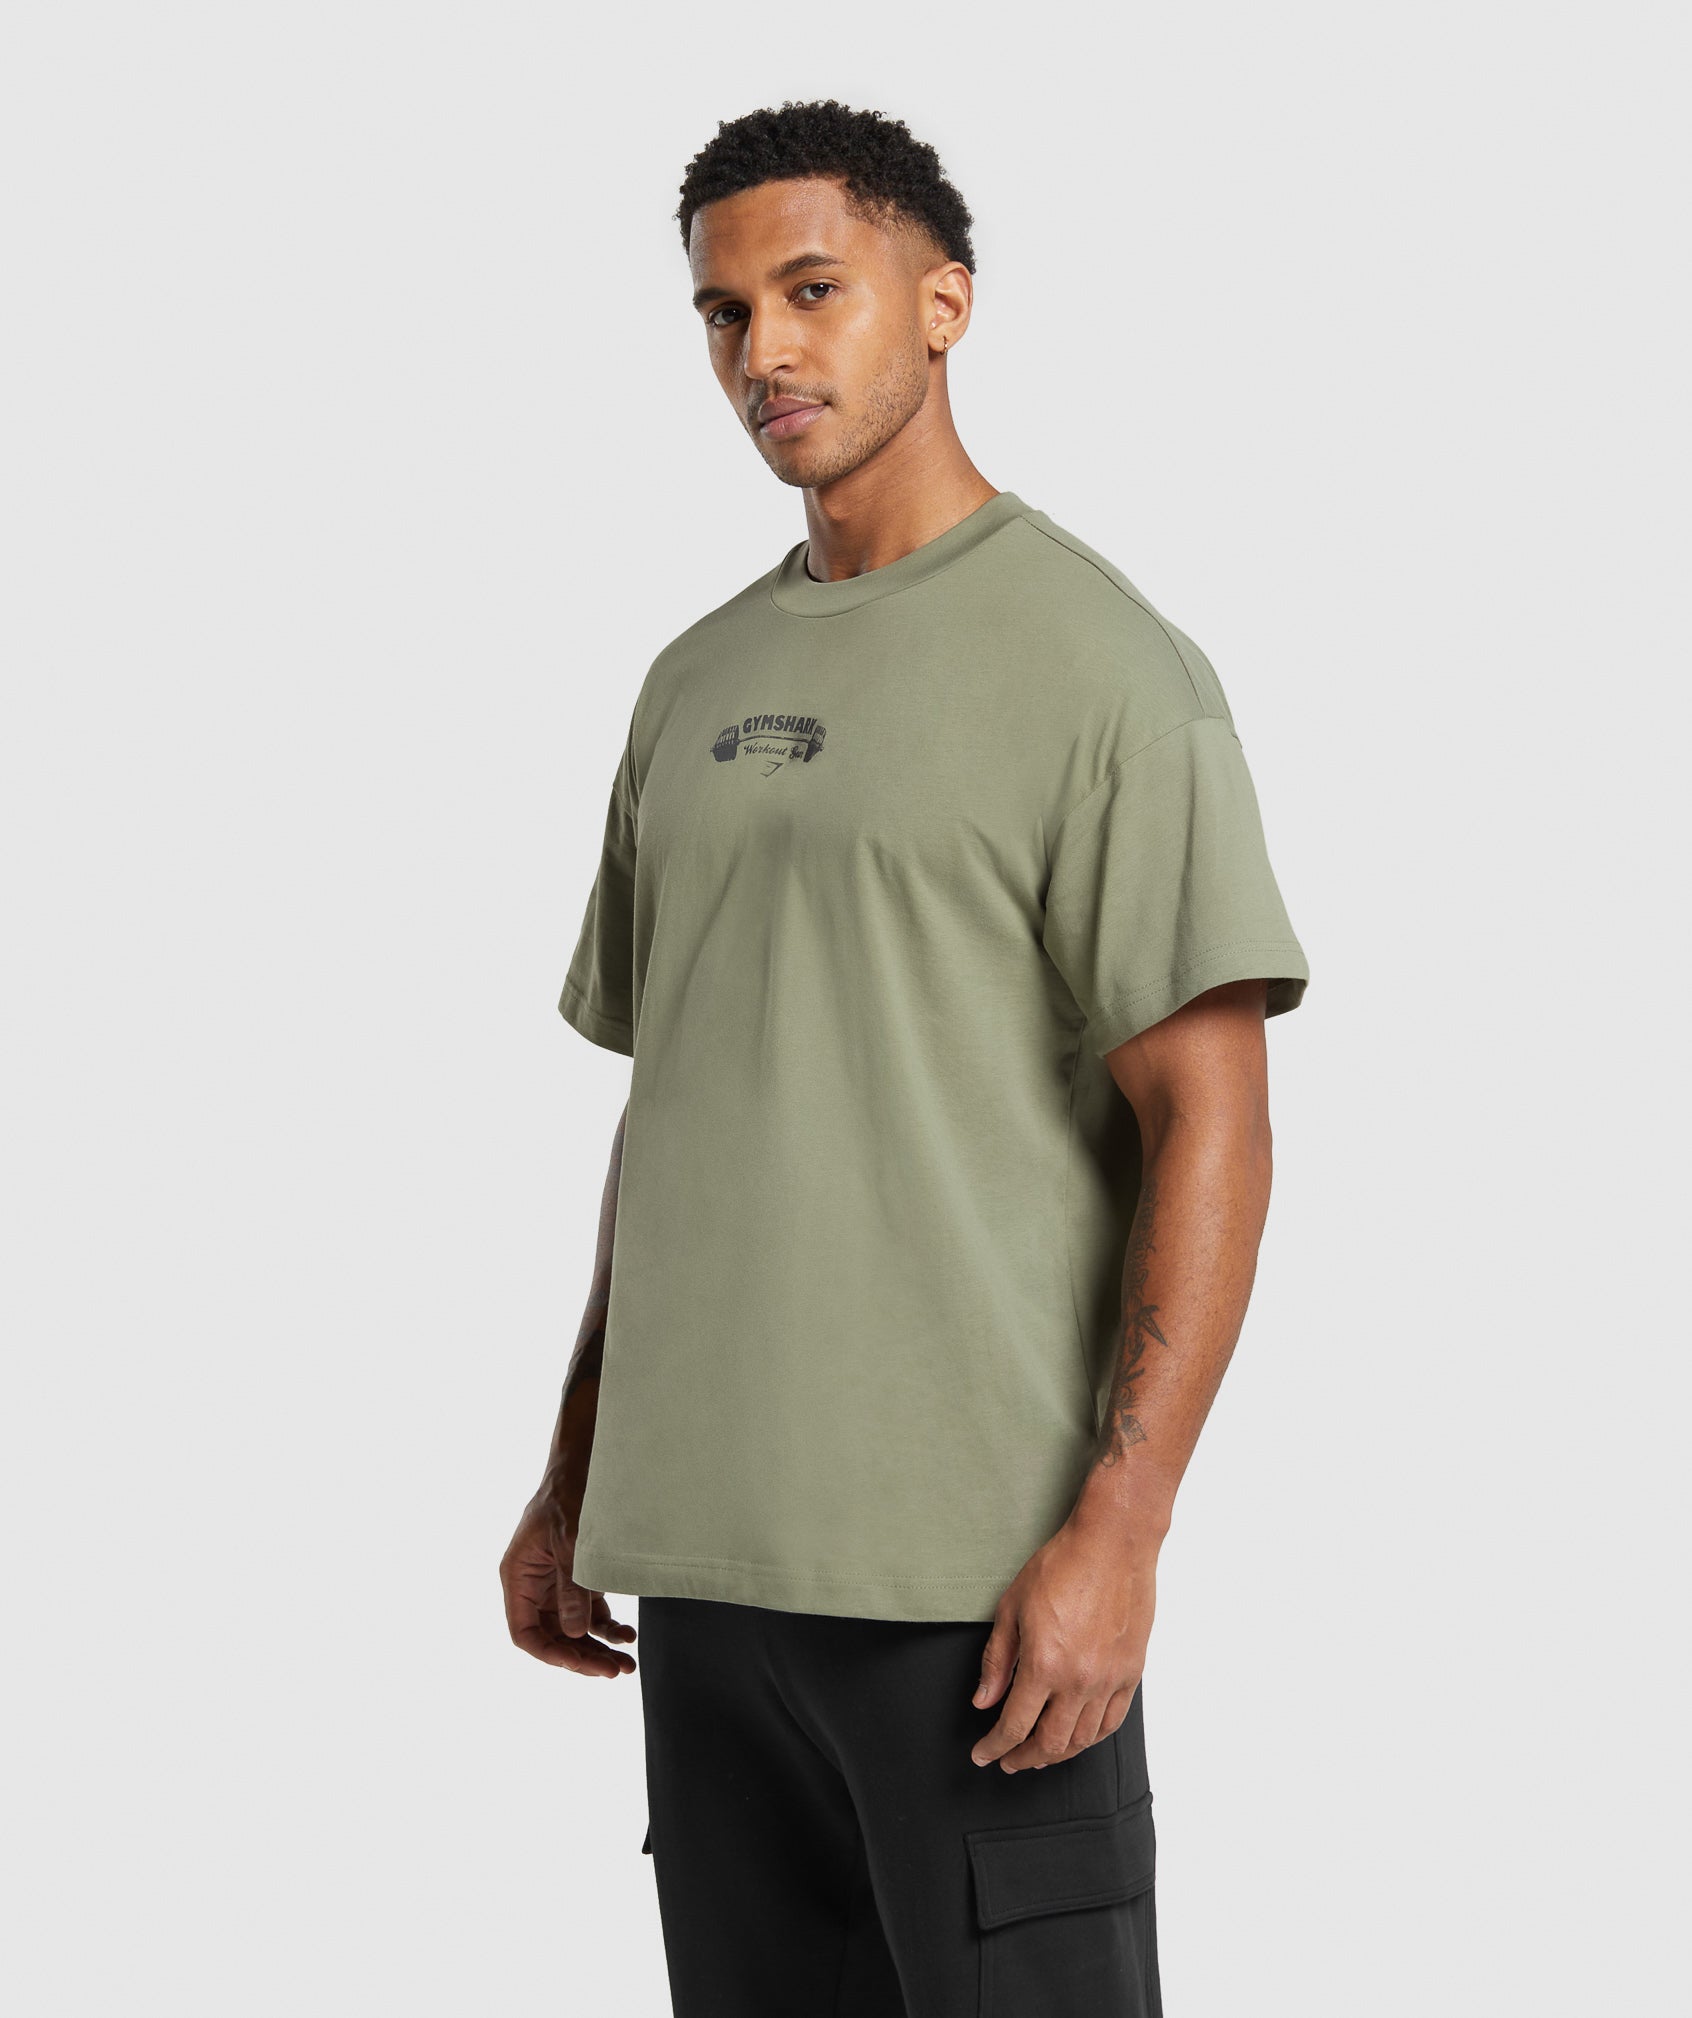 Workout Gear T-Shirt in Utility Green - view 4